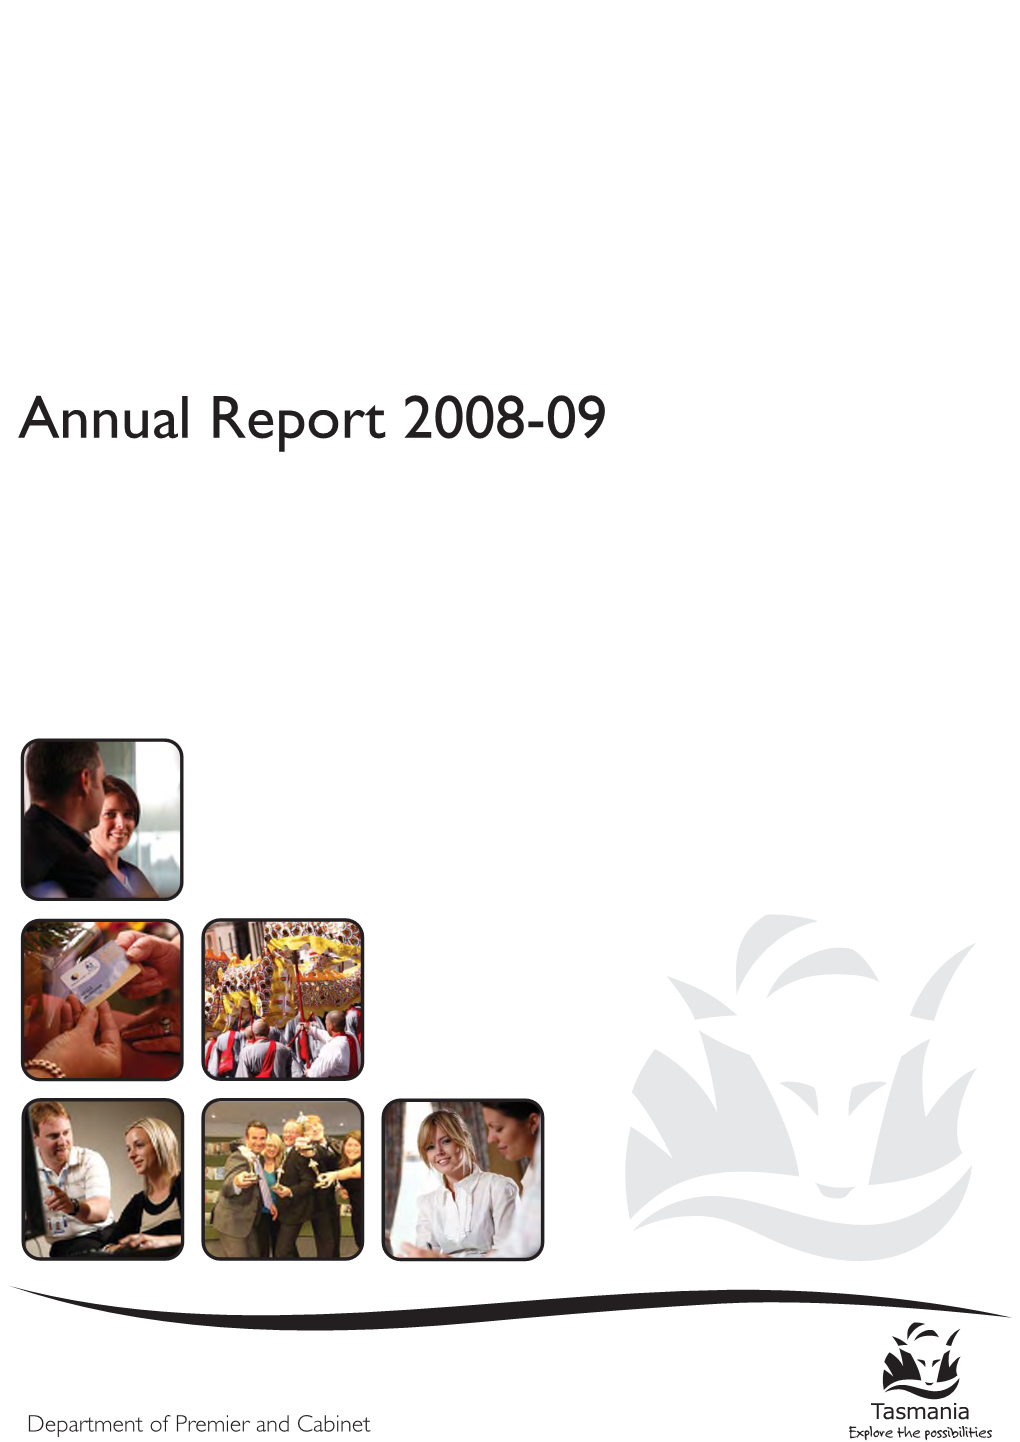 Department of Premier and Cabinet Annual Report 2008-09